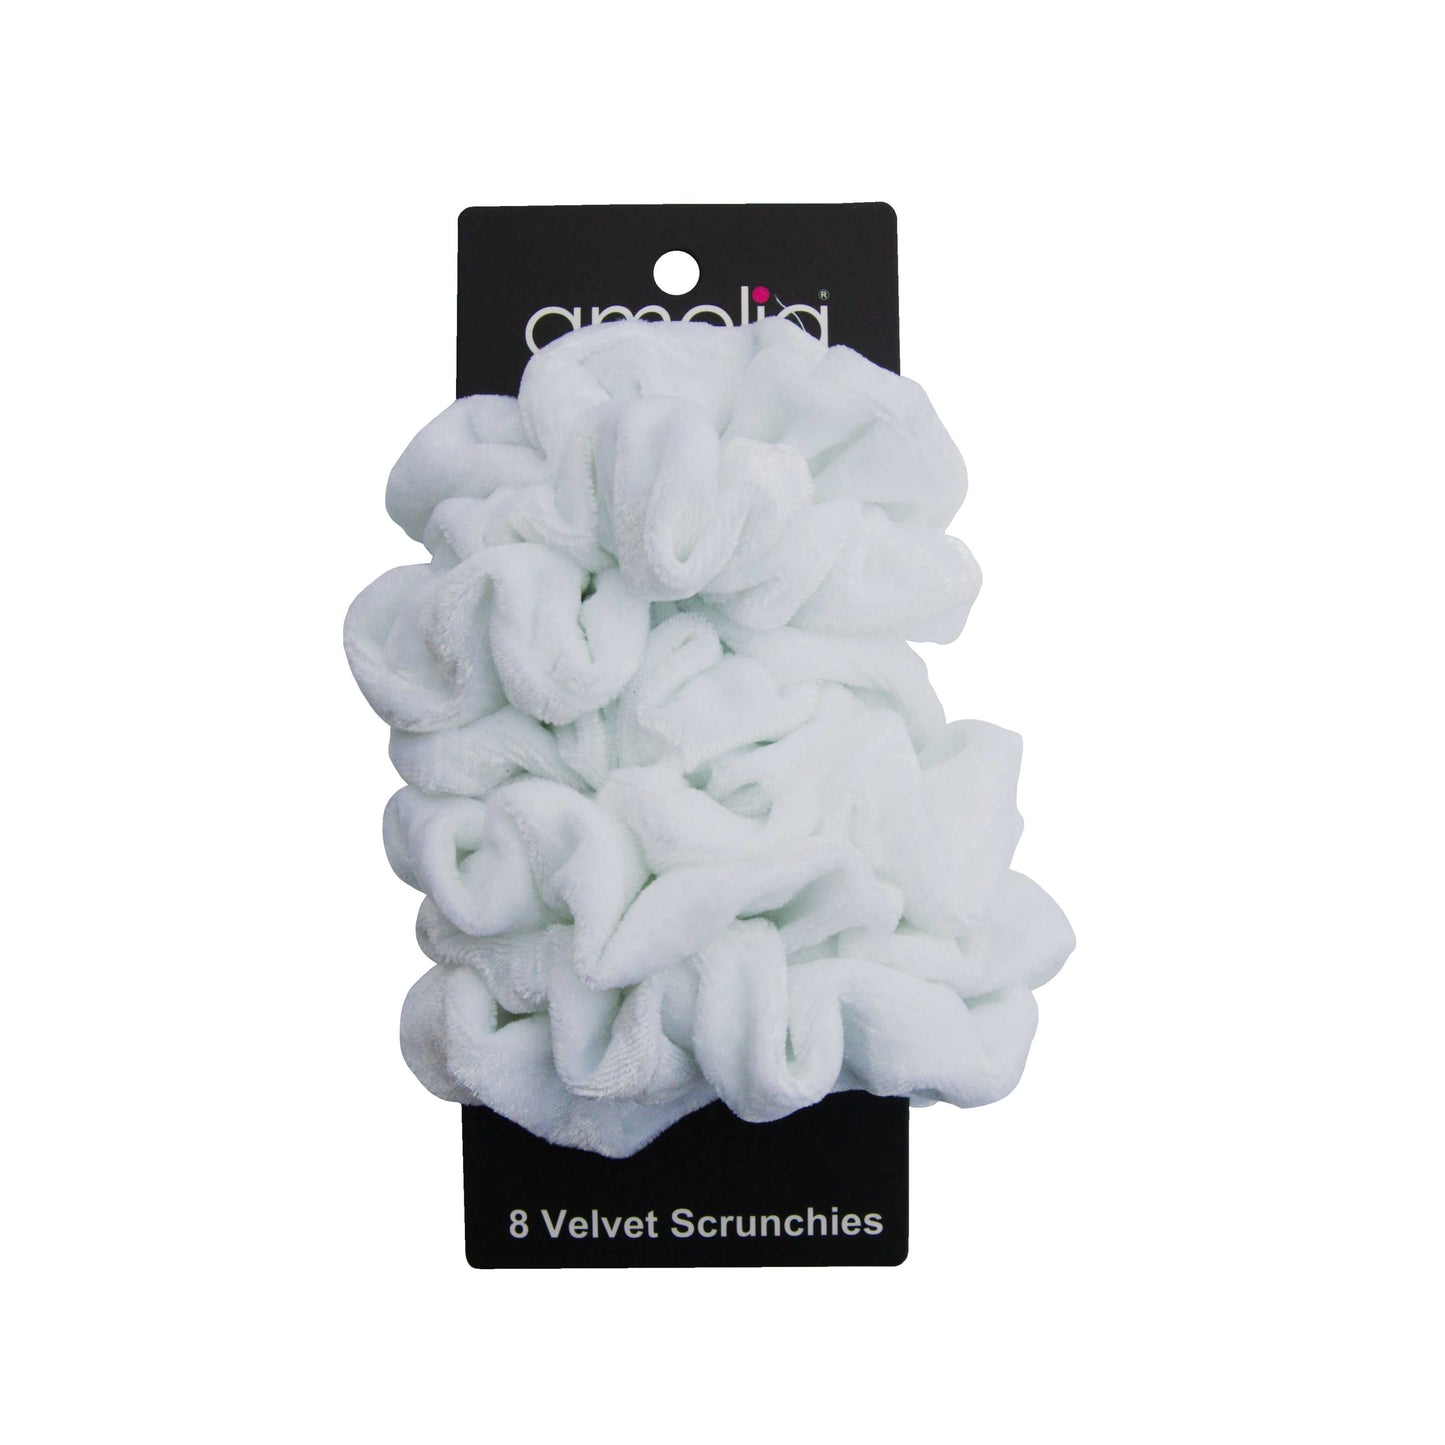 Amelia Beauty, White Velvet Scrunchies, 3.5in Diameter, Gentle on Hair, Strong Hold, No Snag, No Dents or Creases. 8 Pack